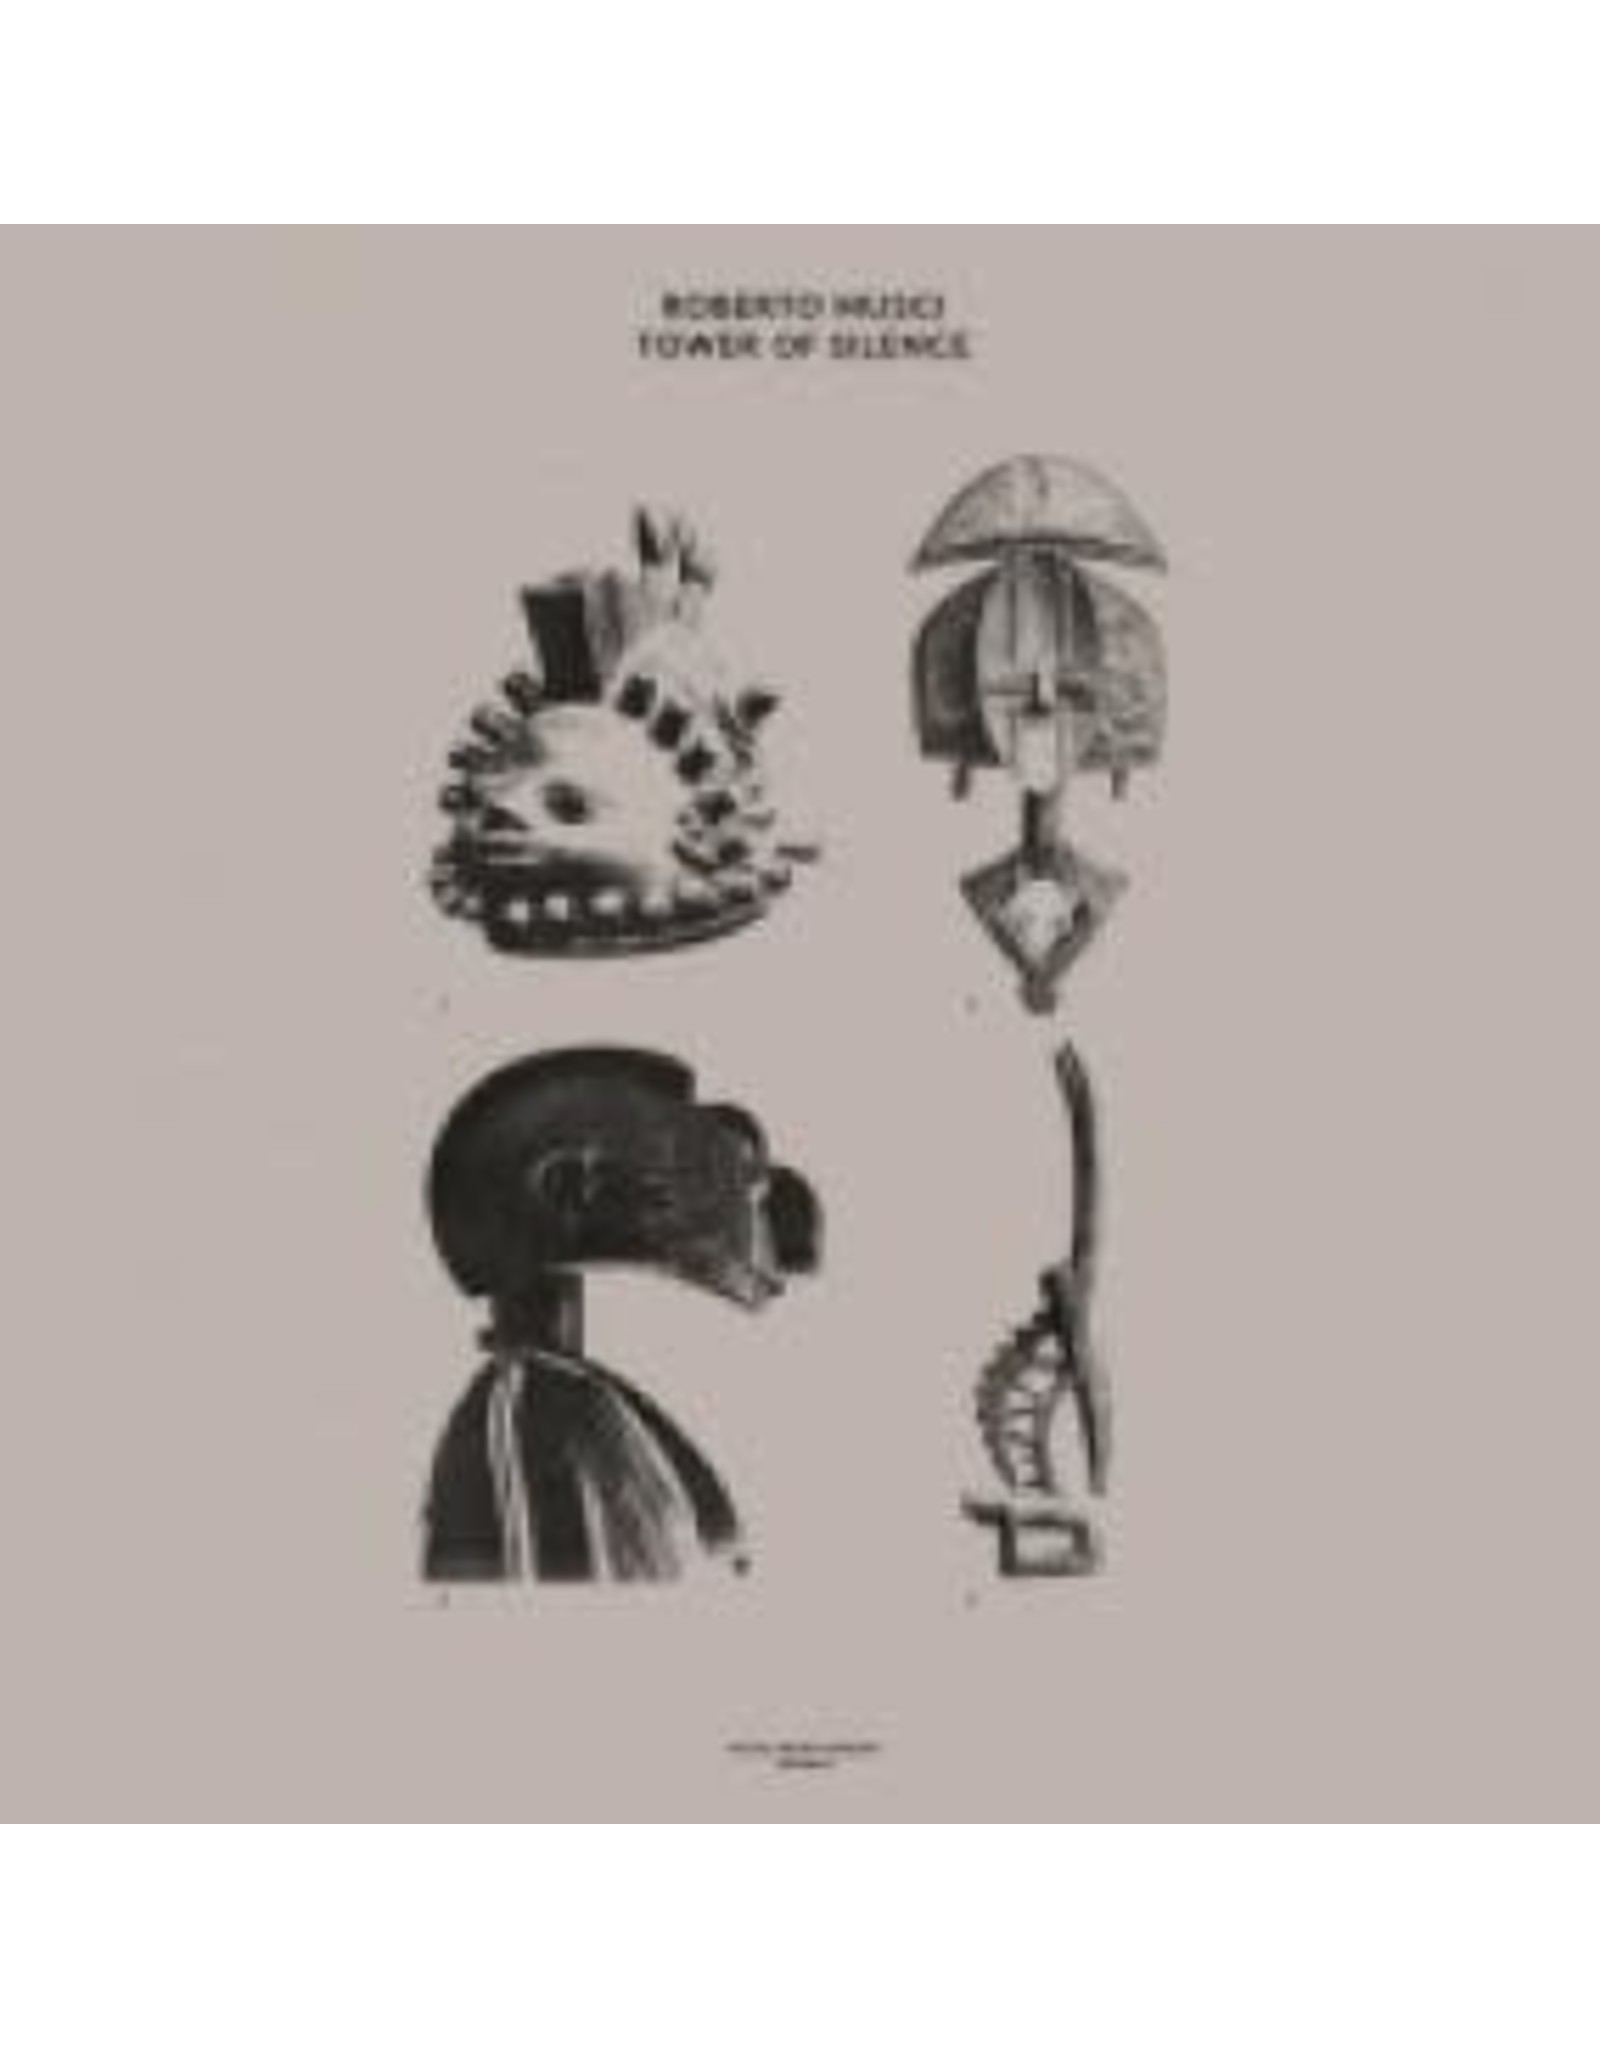 Music From Memory Musci, Roberto: Tower of Silence LP